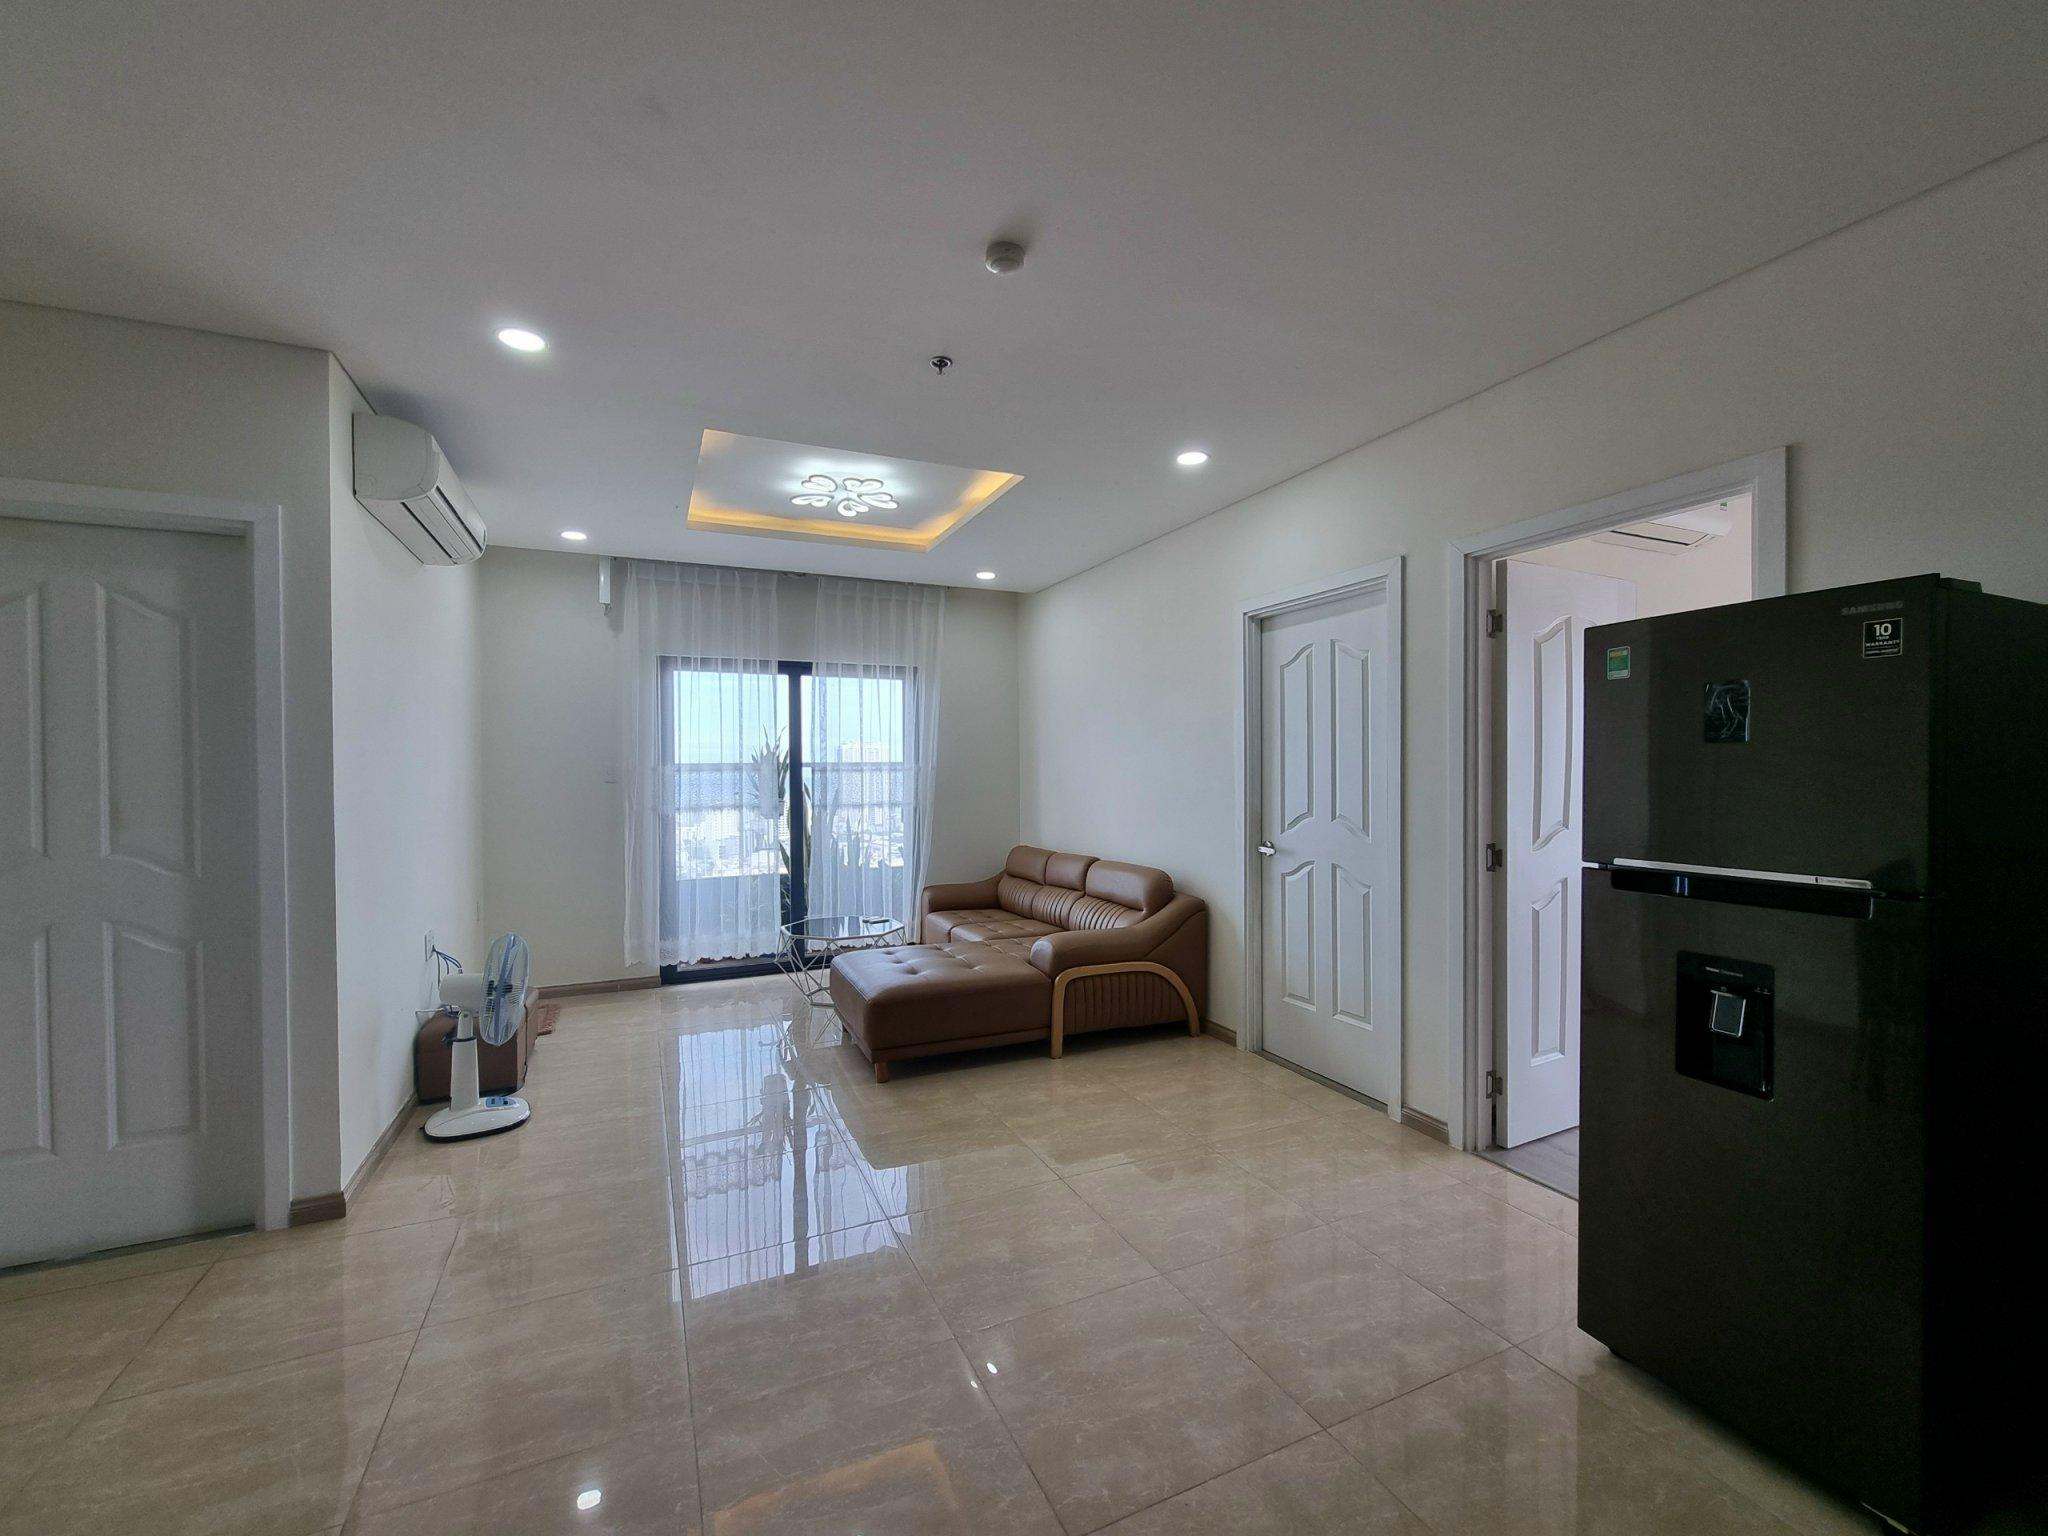 Monarchy Complex,3 bedroom apartment for rent, 115m2, 29th floor, river view.